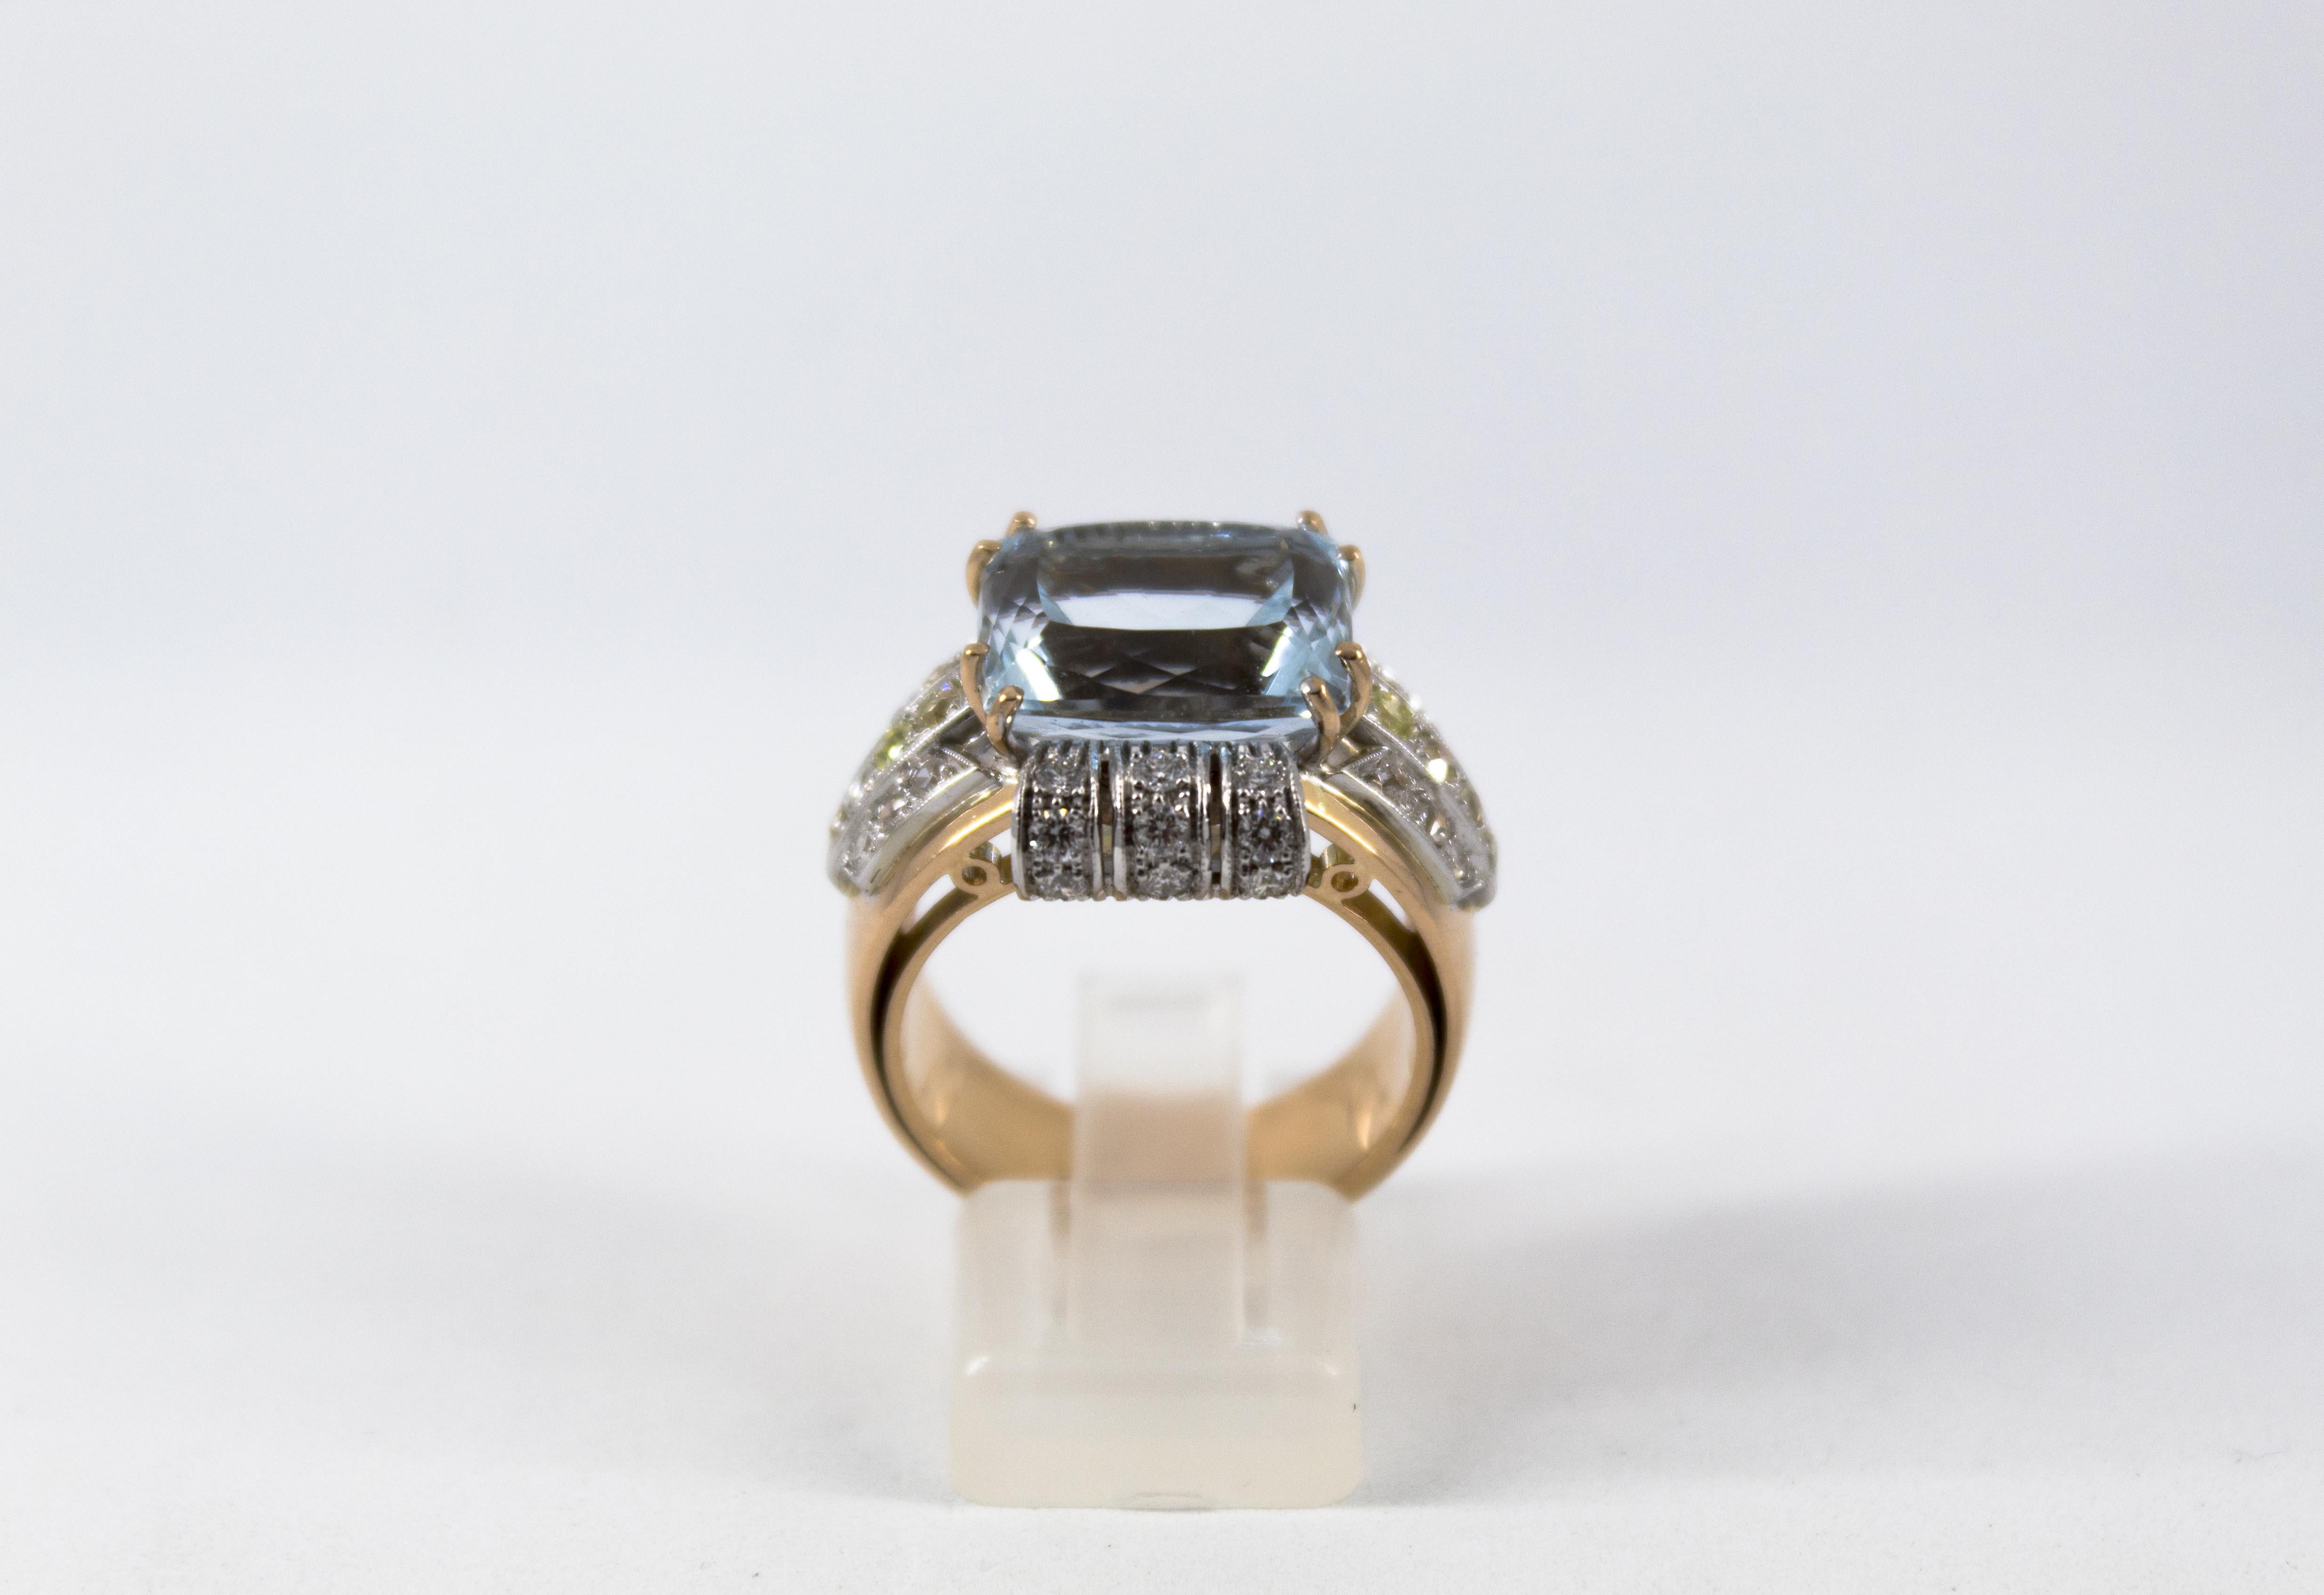 This Ring is made of 14K Yellow Gold.
This Ring has 0.94 Carats of White and Yellow Diamonds (Old Cut Diamond).
This Ring has a 7.18 Carats Aquamarine.
Size ITA: 17 USA: 8
We're a workshop so every piece is handmade, customizable and resizable.